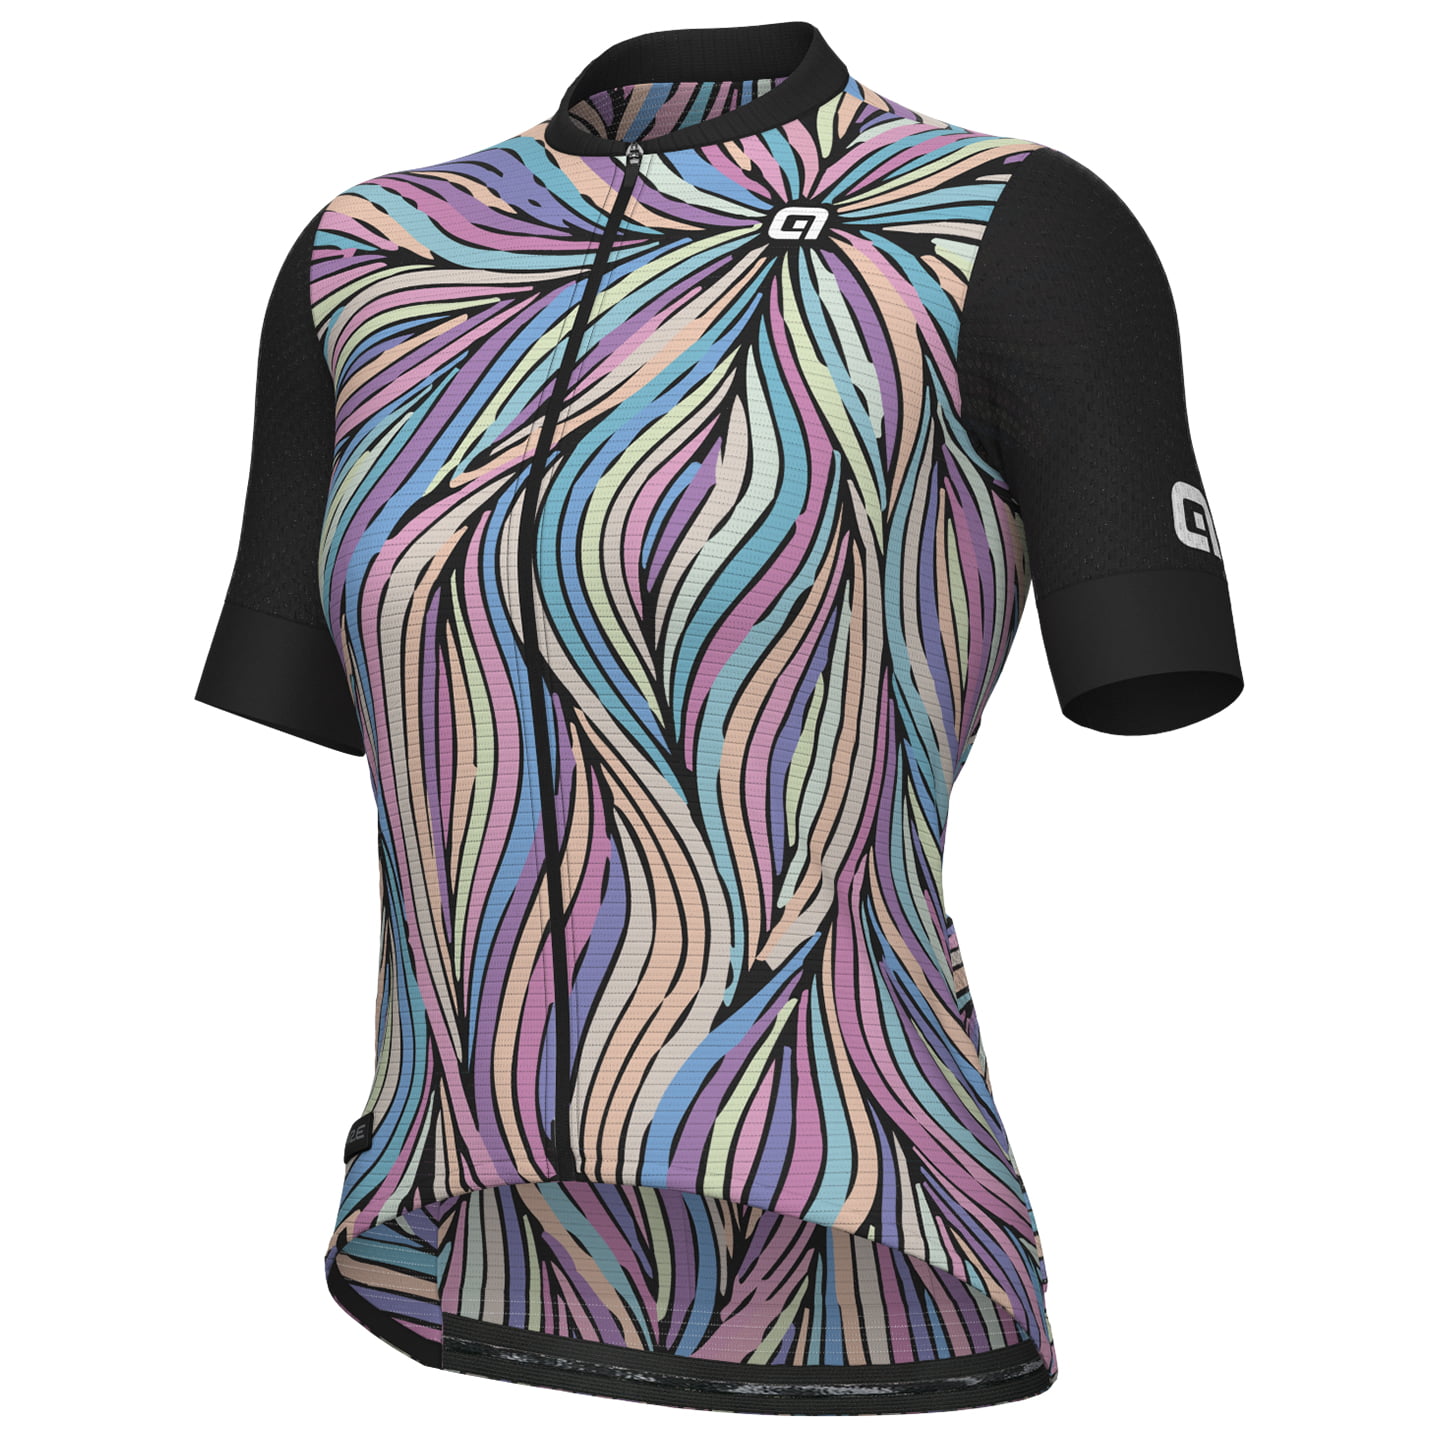 ALE Art Women’s Short Sleeve Jersey, size M, Cycling jersey, Cycle clothing